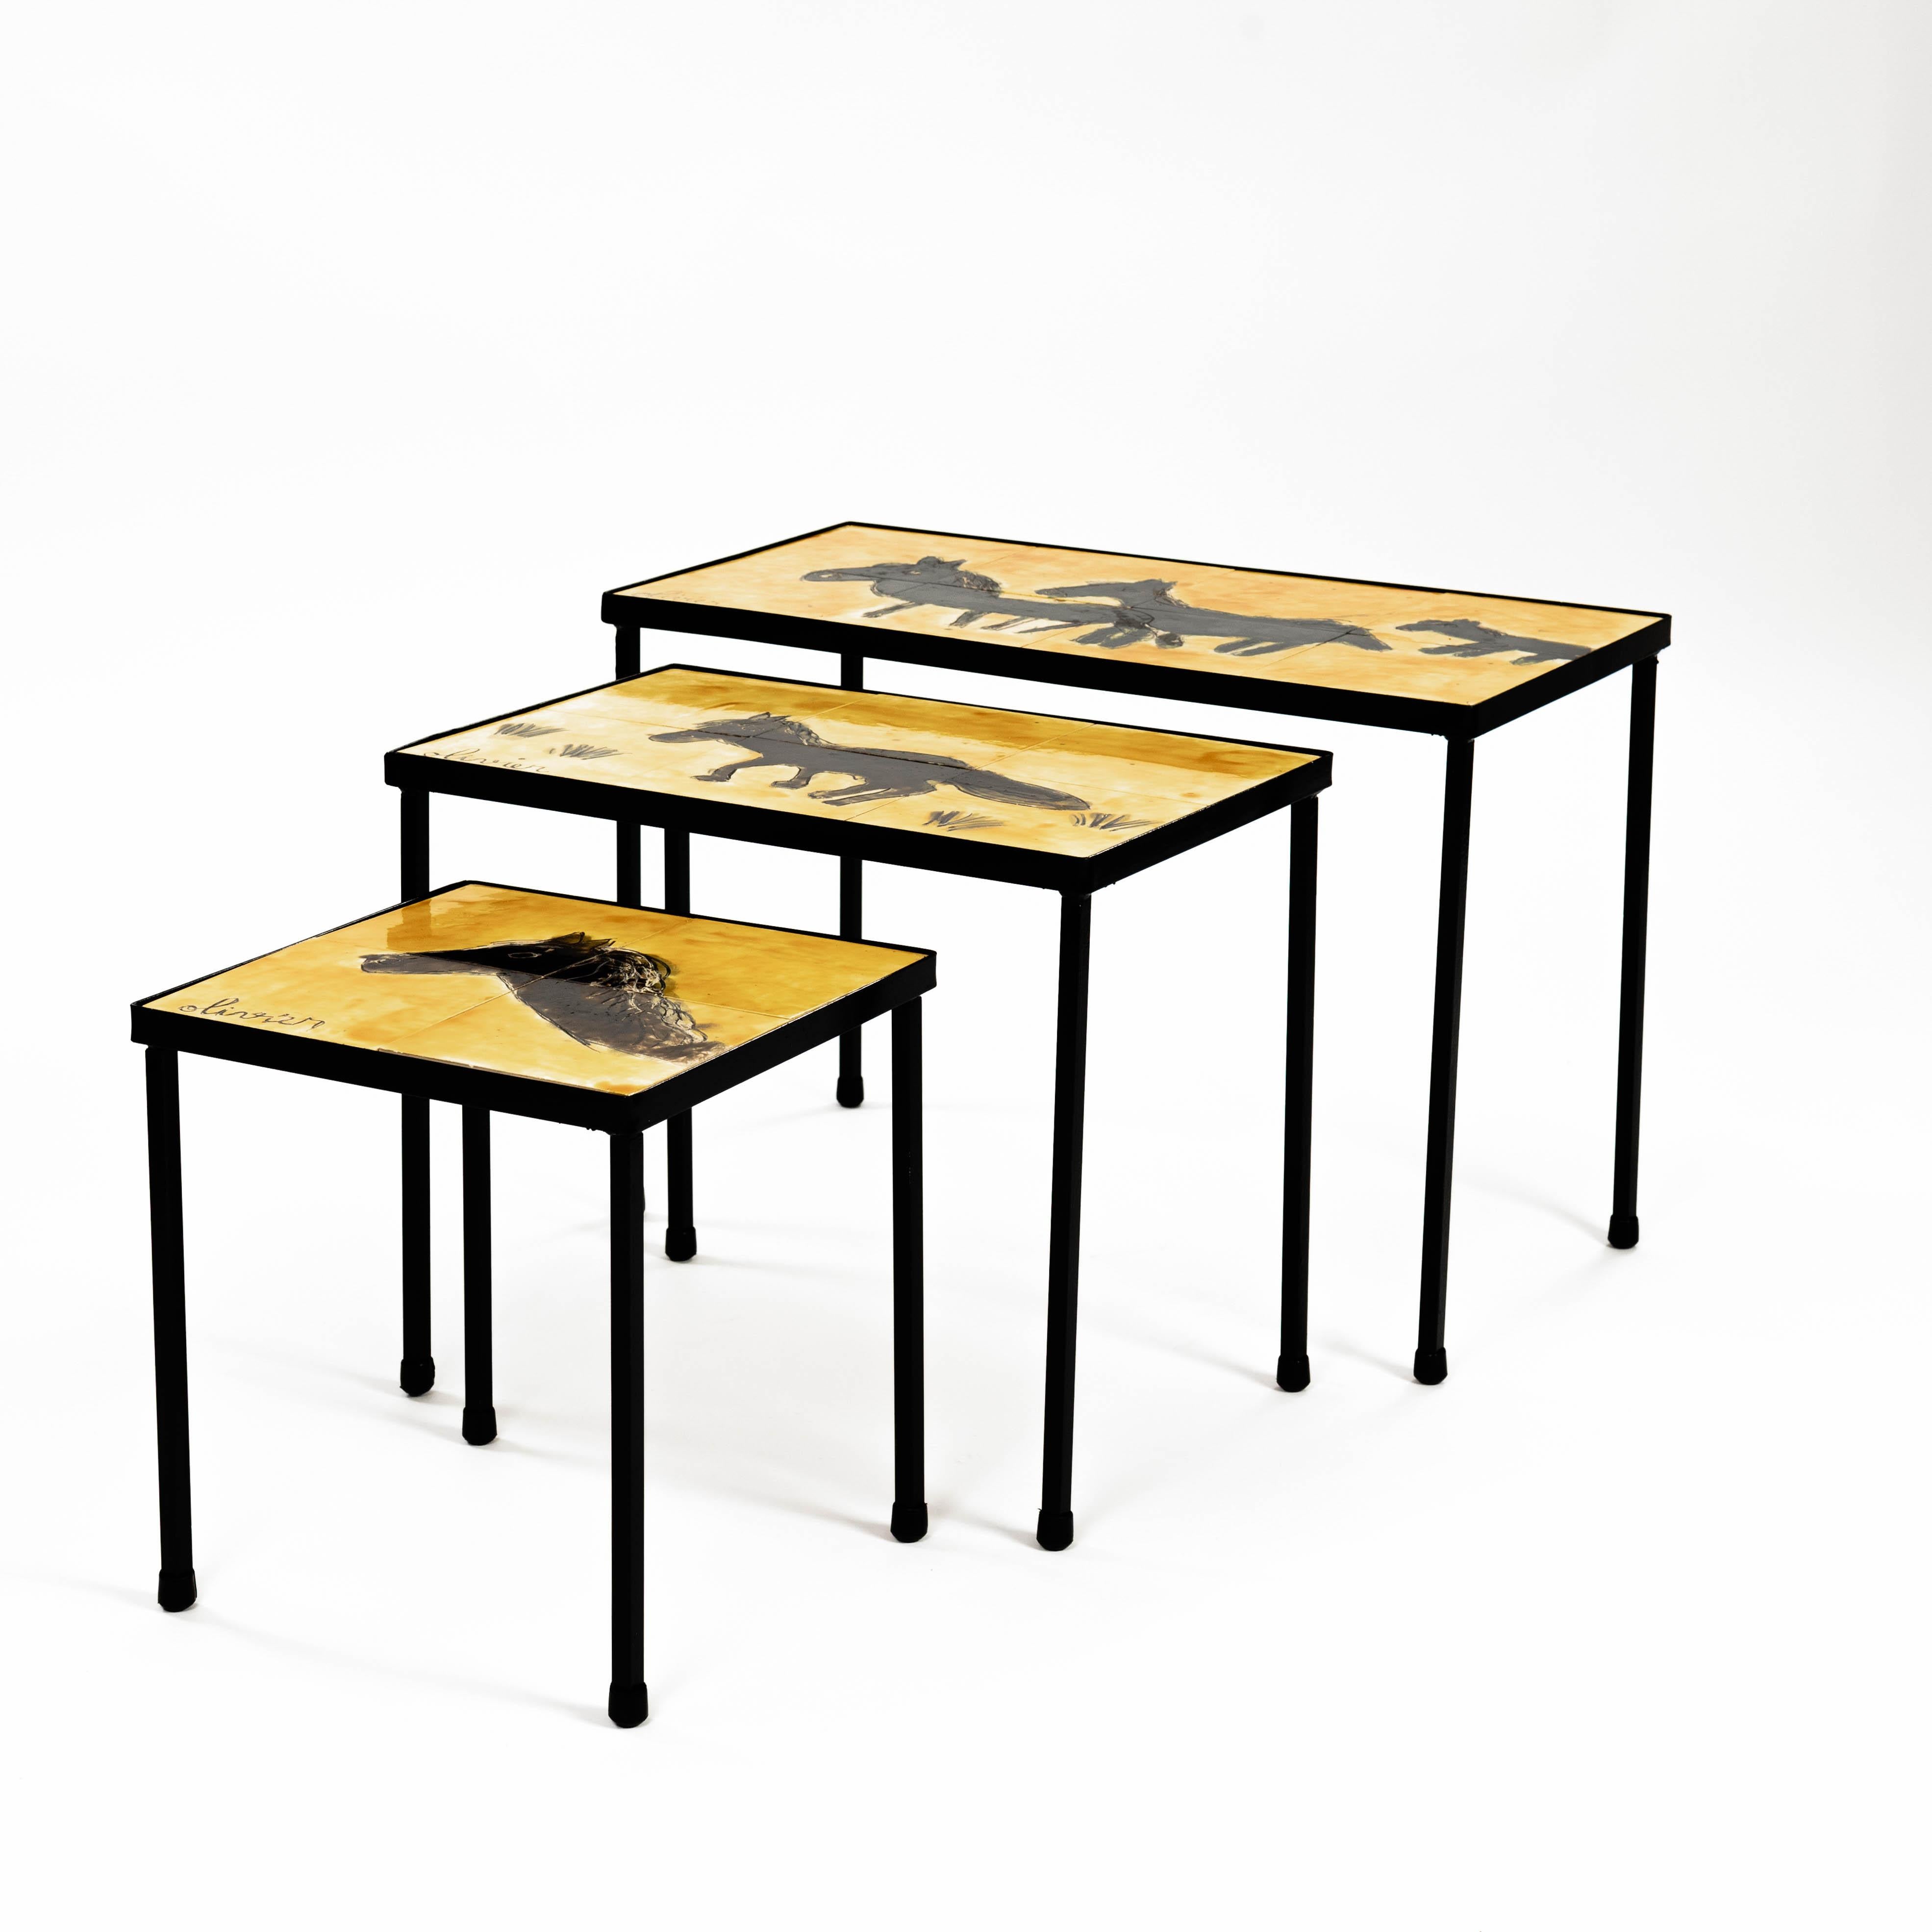 3 French Mid-Century Ceramic Nesting Tables in Yellow-Black, Signed Olivier For Sale 1